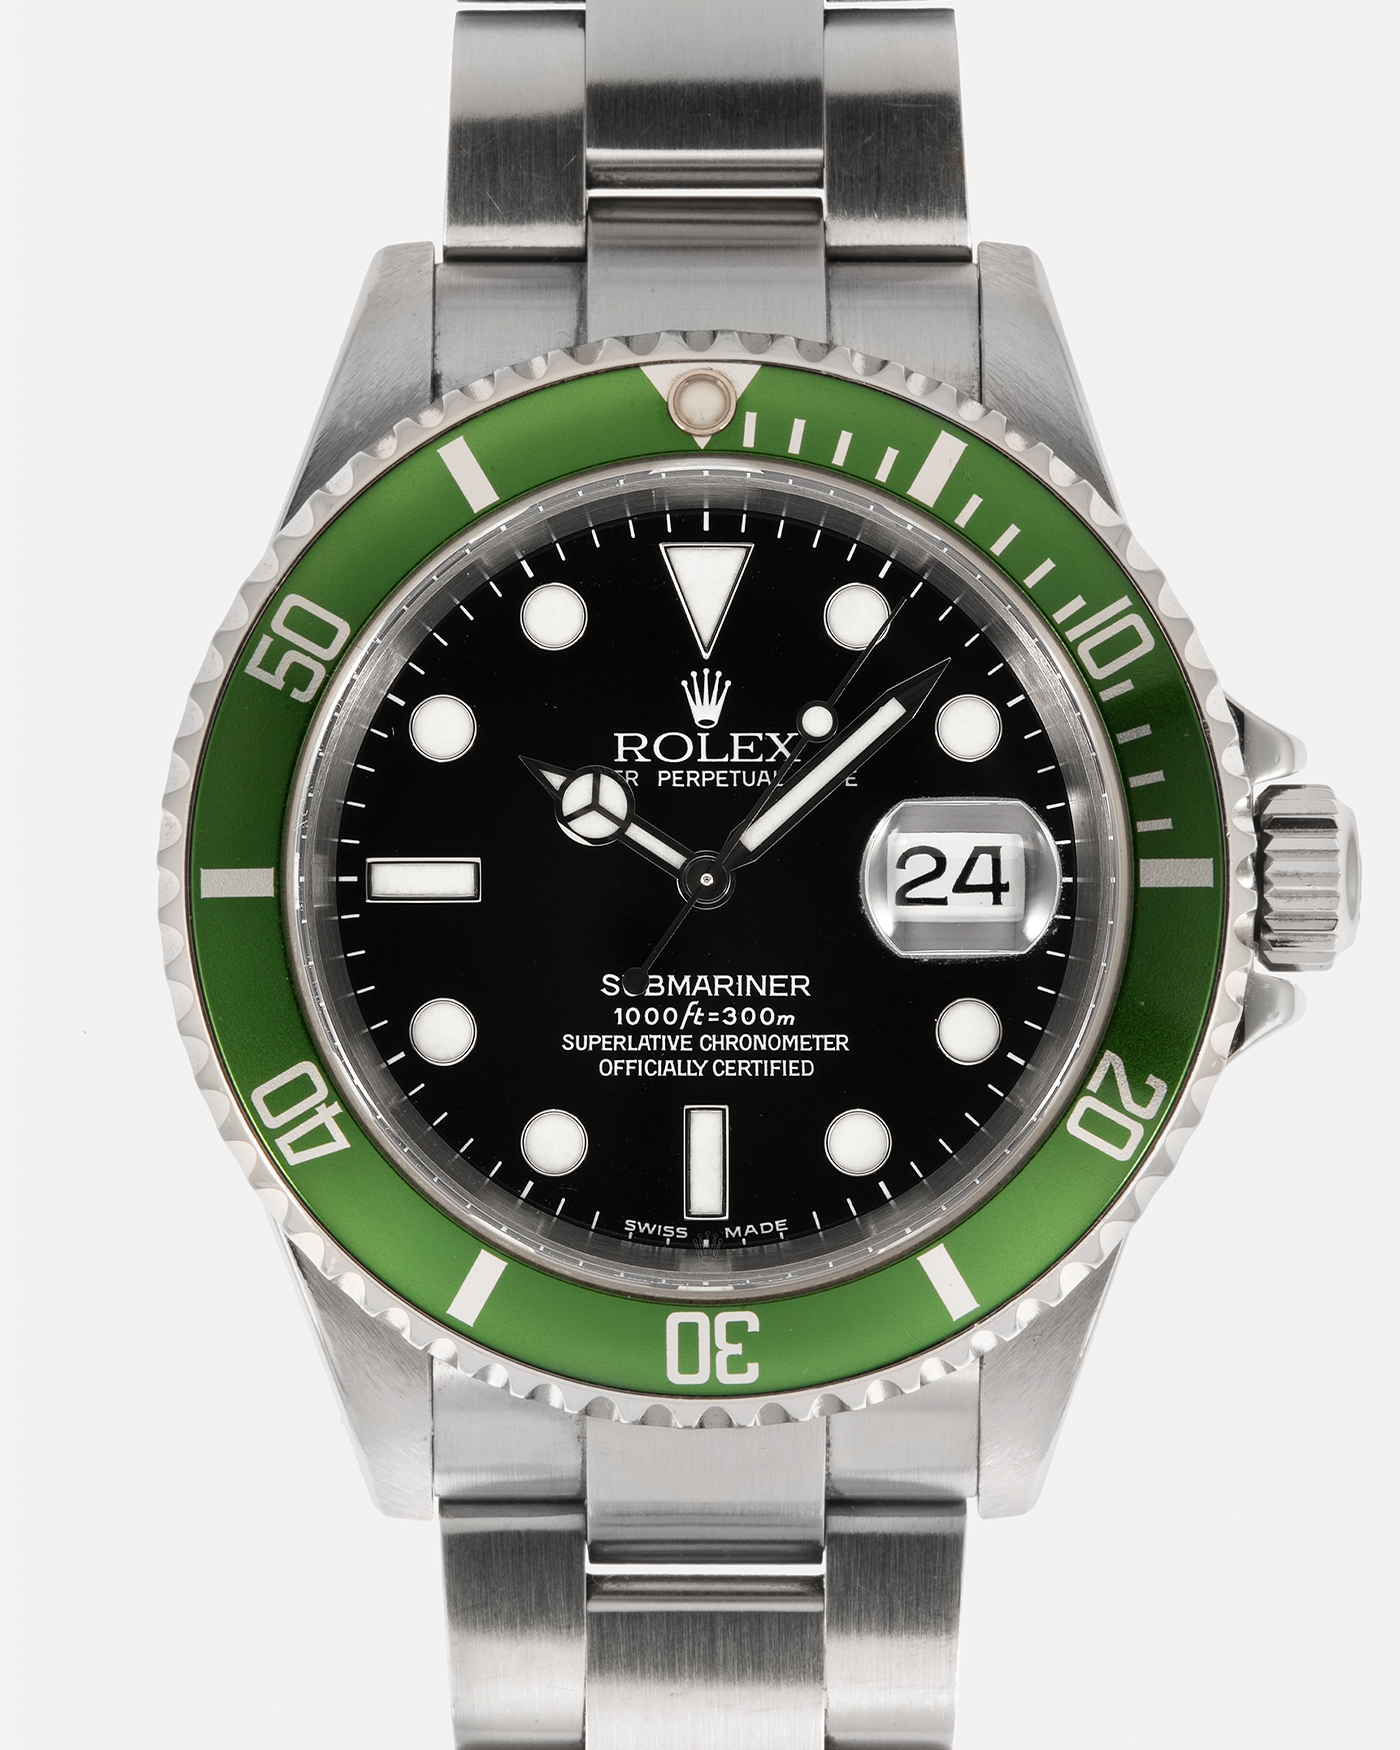 Brand: Rolex Year: 2004 Model: Submariner ‘Kermit’ Reference Number: 16610LV ‘Flat 4’ Serial Number: F Serial Material: Stainless Steel Movement: Rolex Cal. 3135, Self-Winding Case Diameter: 40mm Lug Width: 20mm Bracelet: Rolex Stainless Steel ‘93250’ Oyster Bracelet with signed ‘CL3’ Clasp\